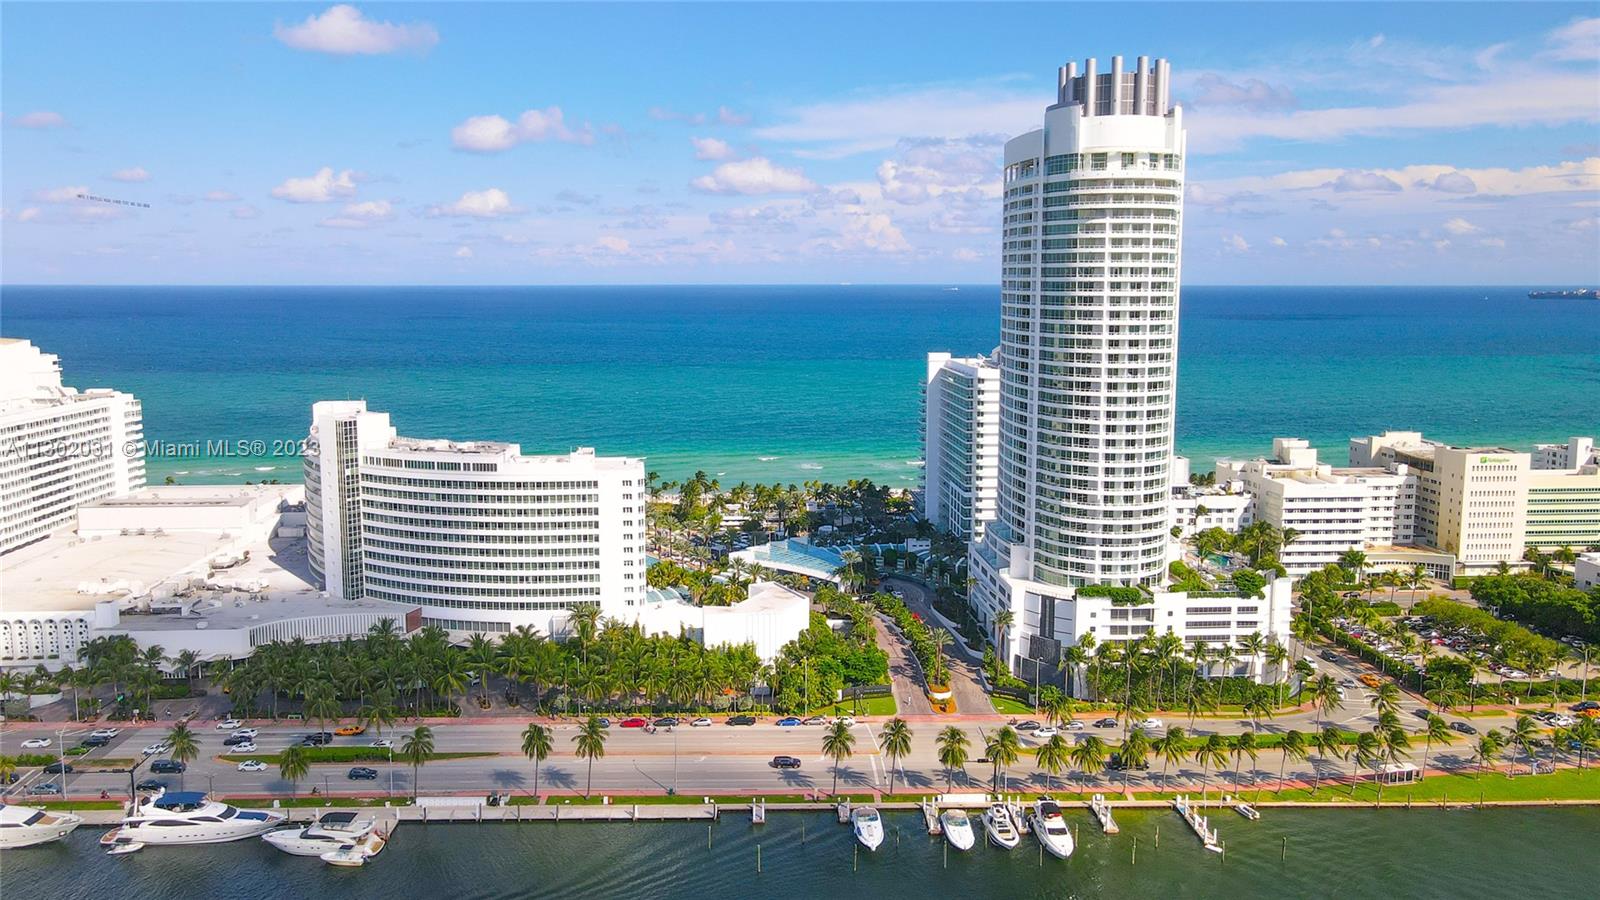 Enjoy full service, vacation-style living in this newly remodeled furnished turnkey corner unit at the Fontainebleau II / Tresor. Offering floor to ceiling glass windows, 2 private balconies, spacious living room with sleeper sofa, open kitchen layout, king bed in master bedroom with walk in closet, washer/dryer & more. Enroll in hotel rental program & receive income while away! The Fontainebleau Resort offers luxury amenities on 22 oceanfront acres including award-winning restaurants, LIV night club, Lapis spa & state-of-the-art fitness center. Maintenance includes: AC, local calls, electricity, valet + daily free breakfast in the owners lounge. Click the virtual tour link to see video of property.